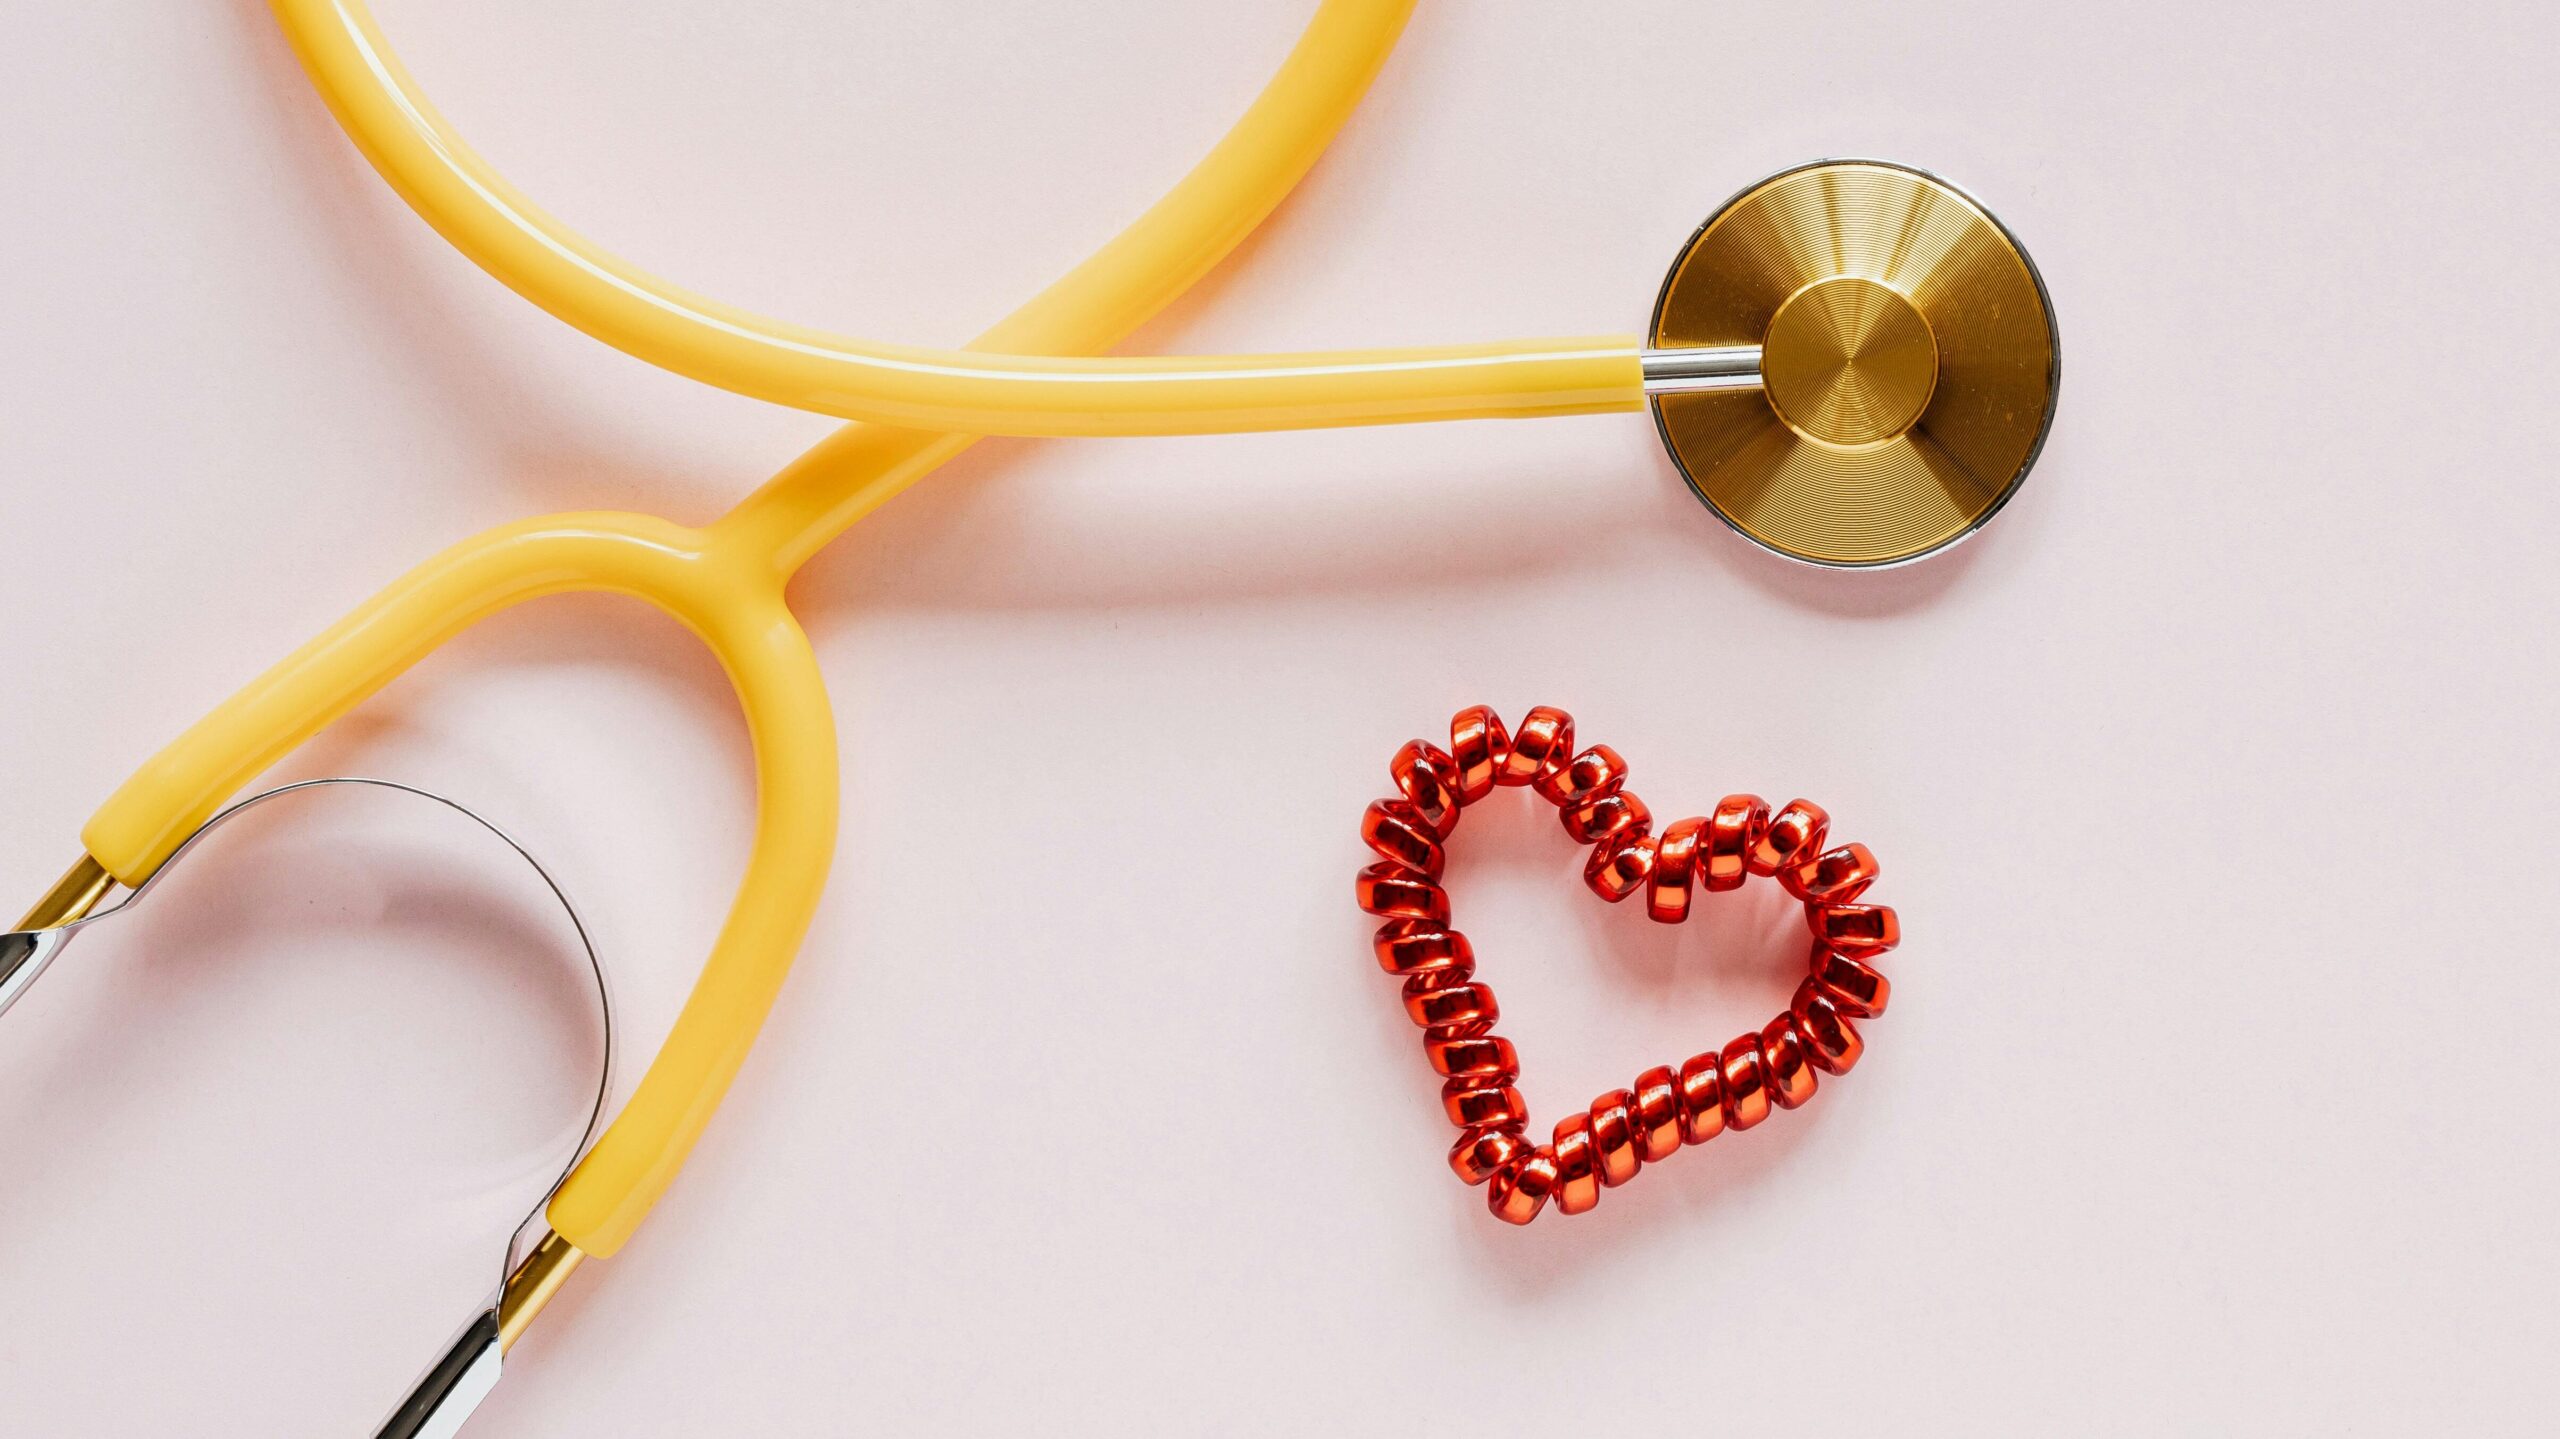 Yellow stethoscope with a red heart-shaped coil next to it 